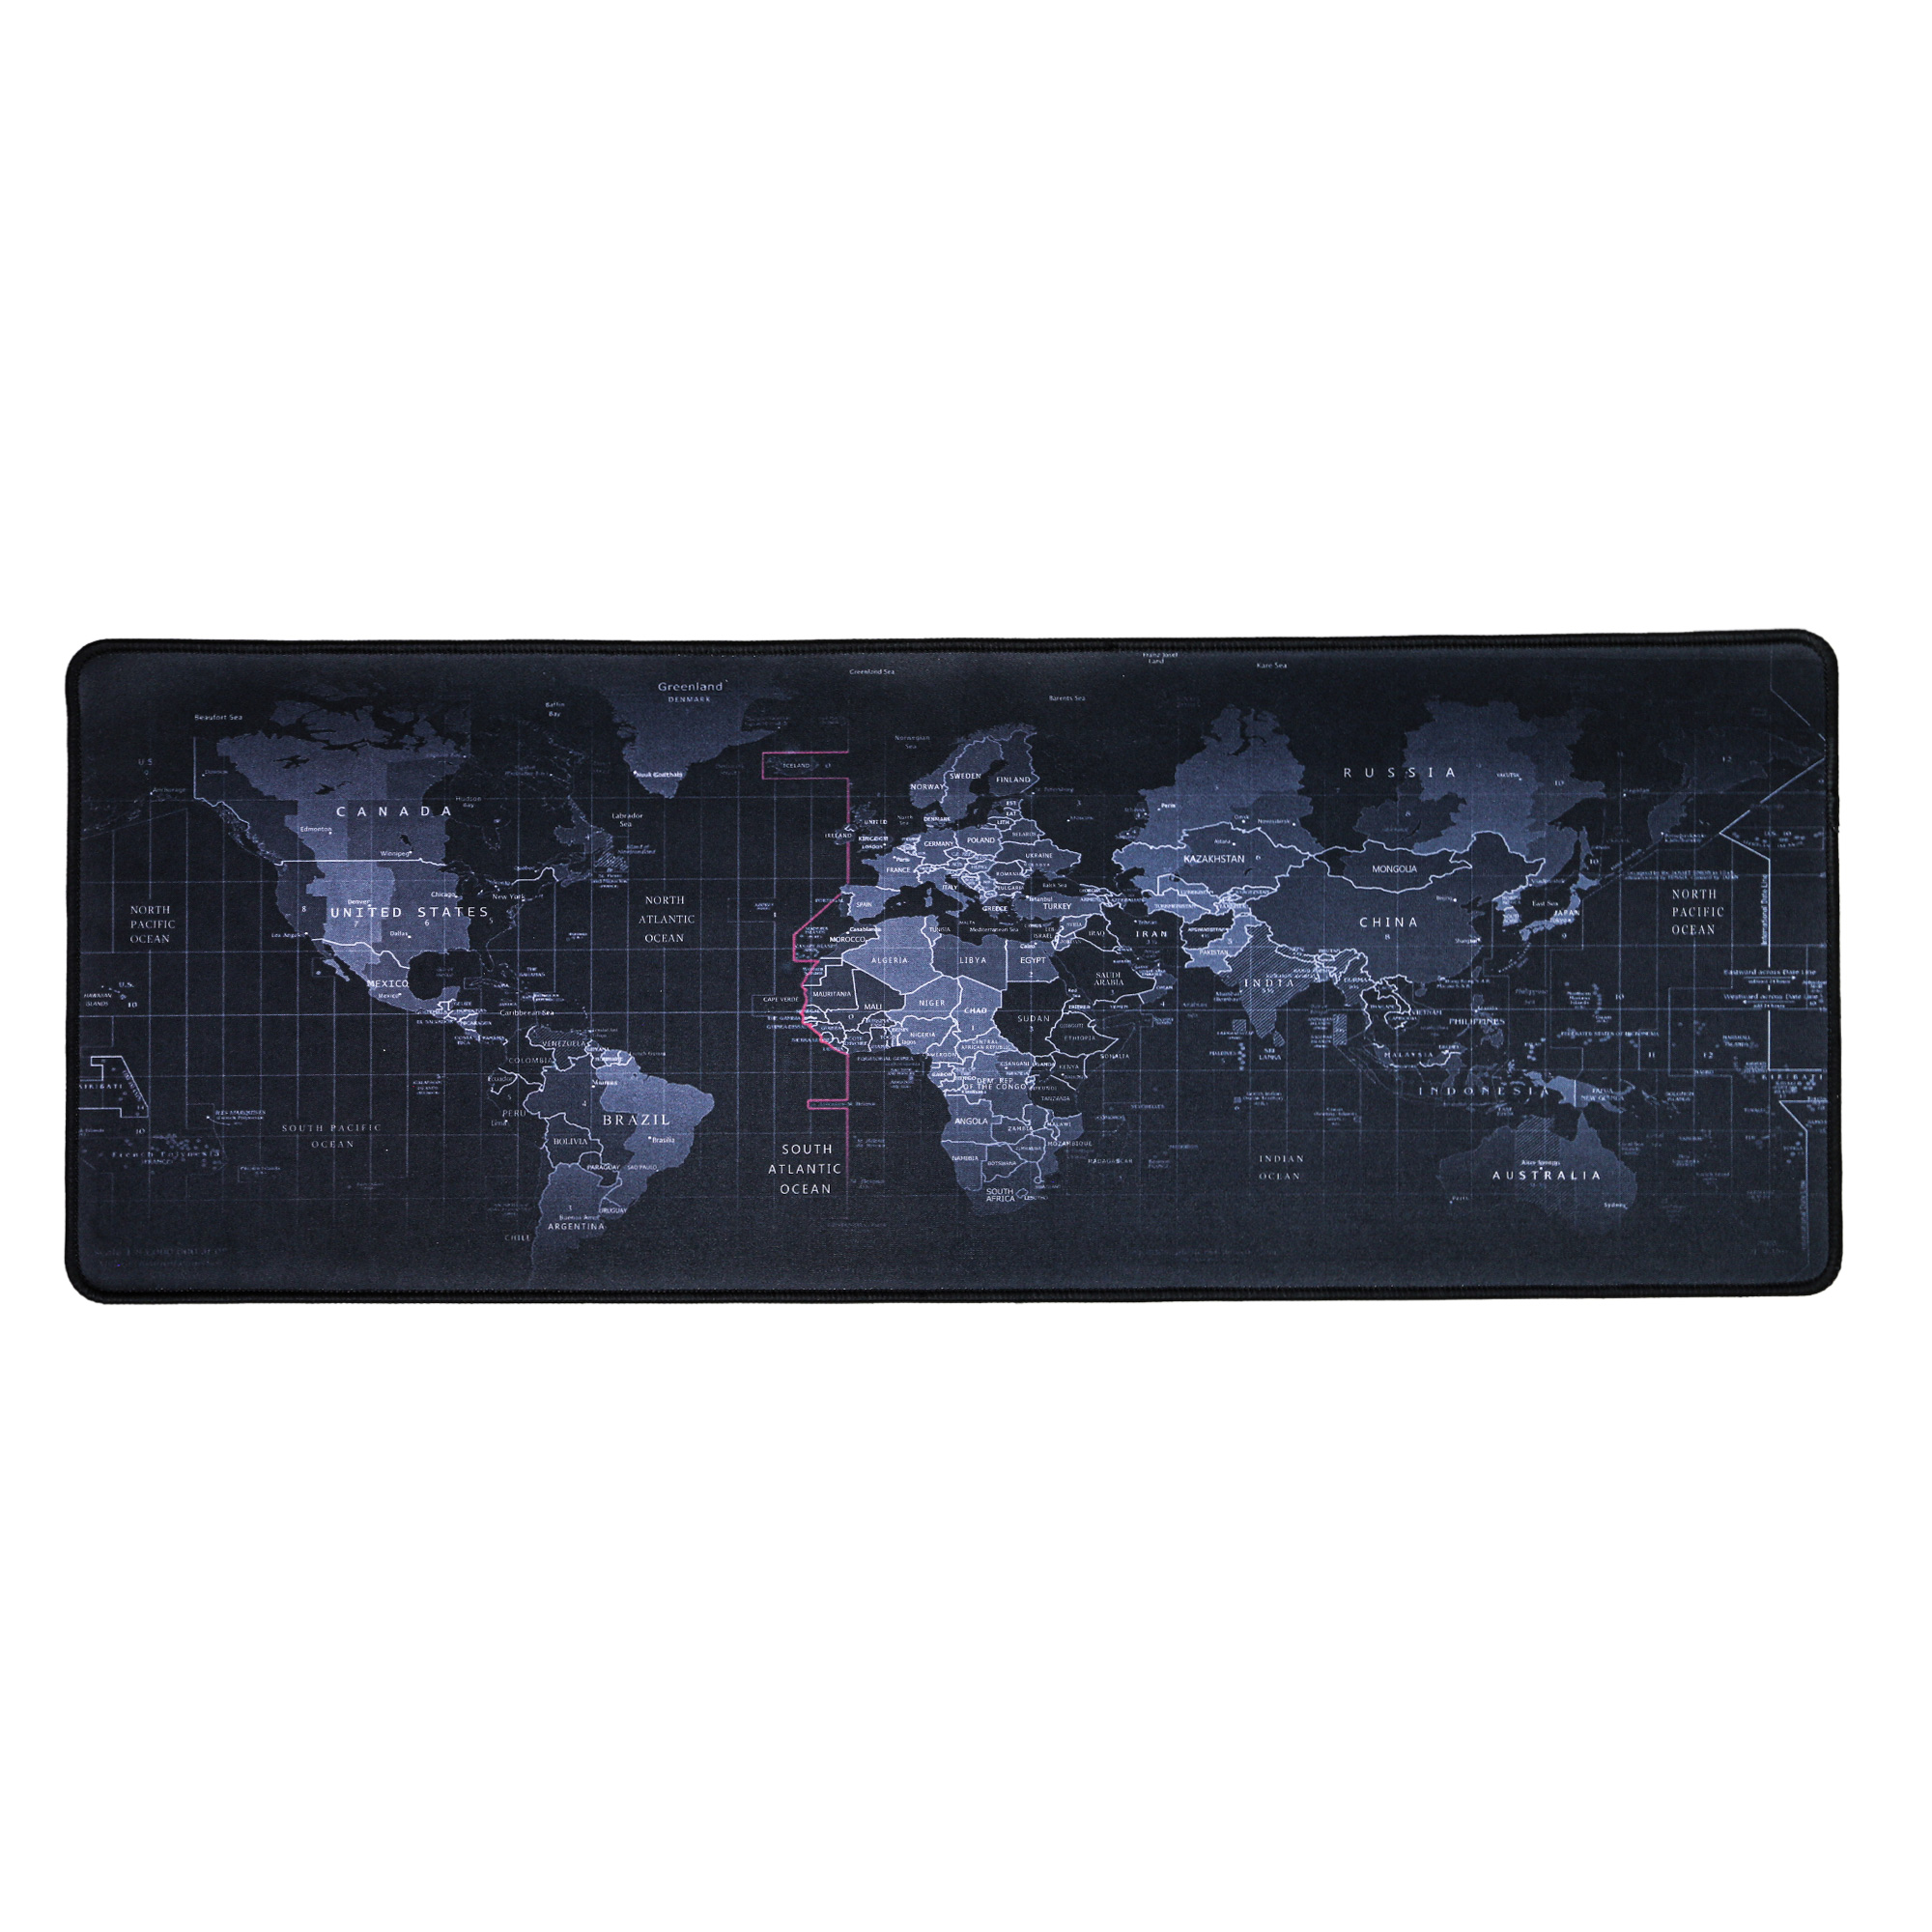 Large Gaming Mouse PadMouse Control Version The World Map Mouse Mat Desk Pad Keyboard Pad Game%20(5)